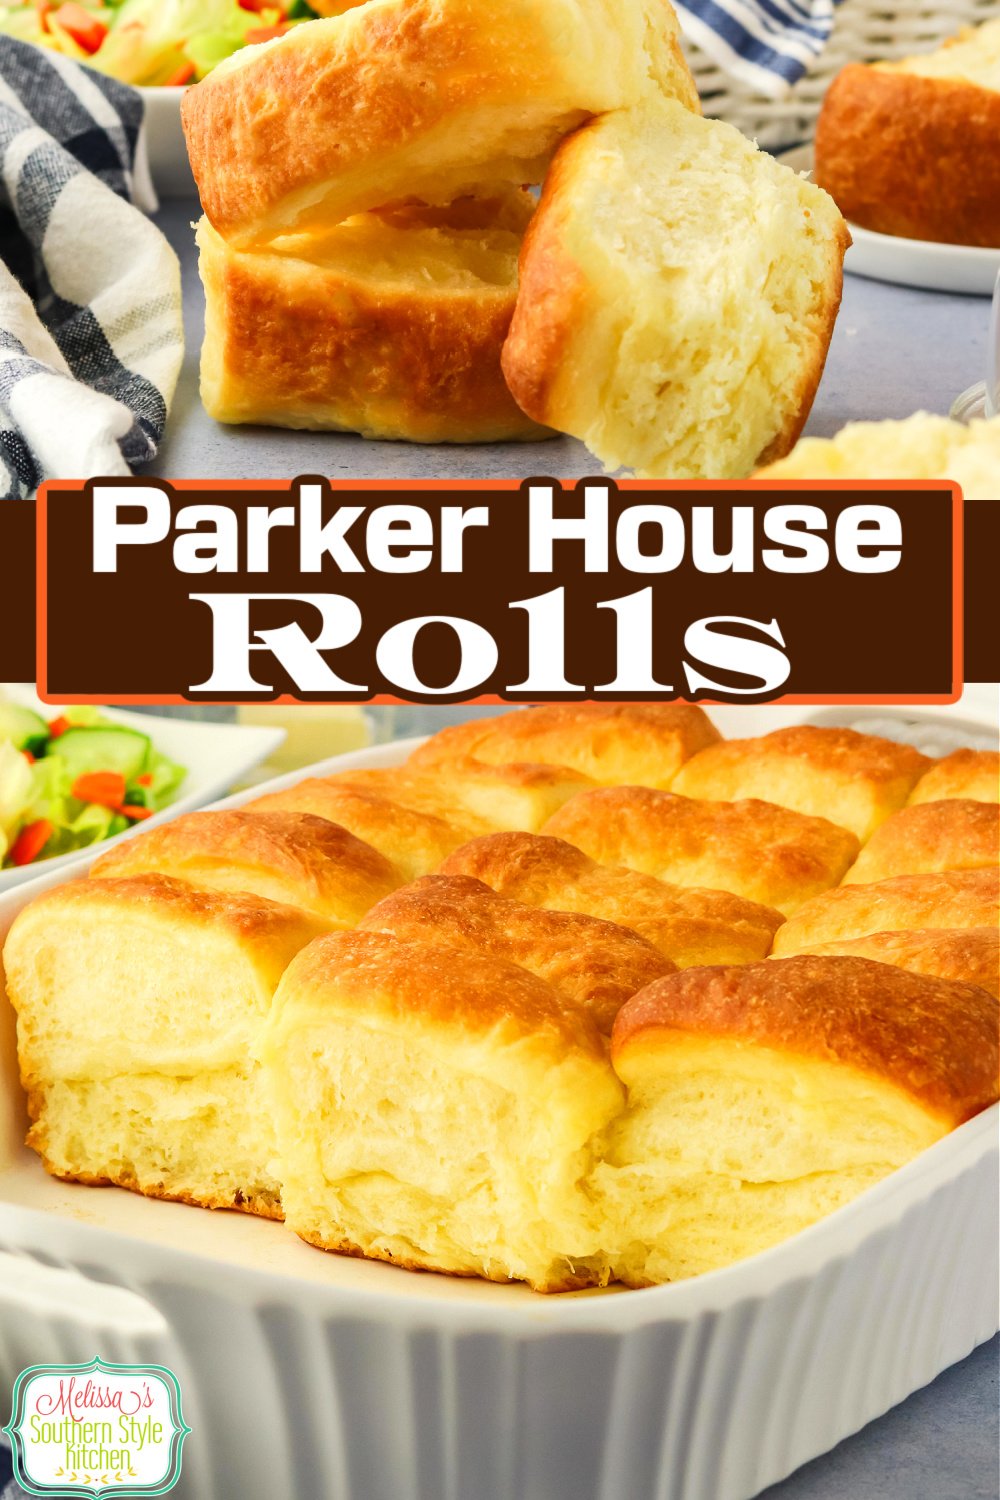 This recipe for homemade Parker House Rolls results in soft and pillowy buttery rolls making the perfect side dish for any meal.  #rolls #parkerhouserolls #breadrecipes #homemaderolls #yeastrolls via @melissasssk